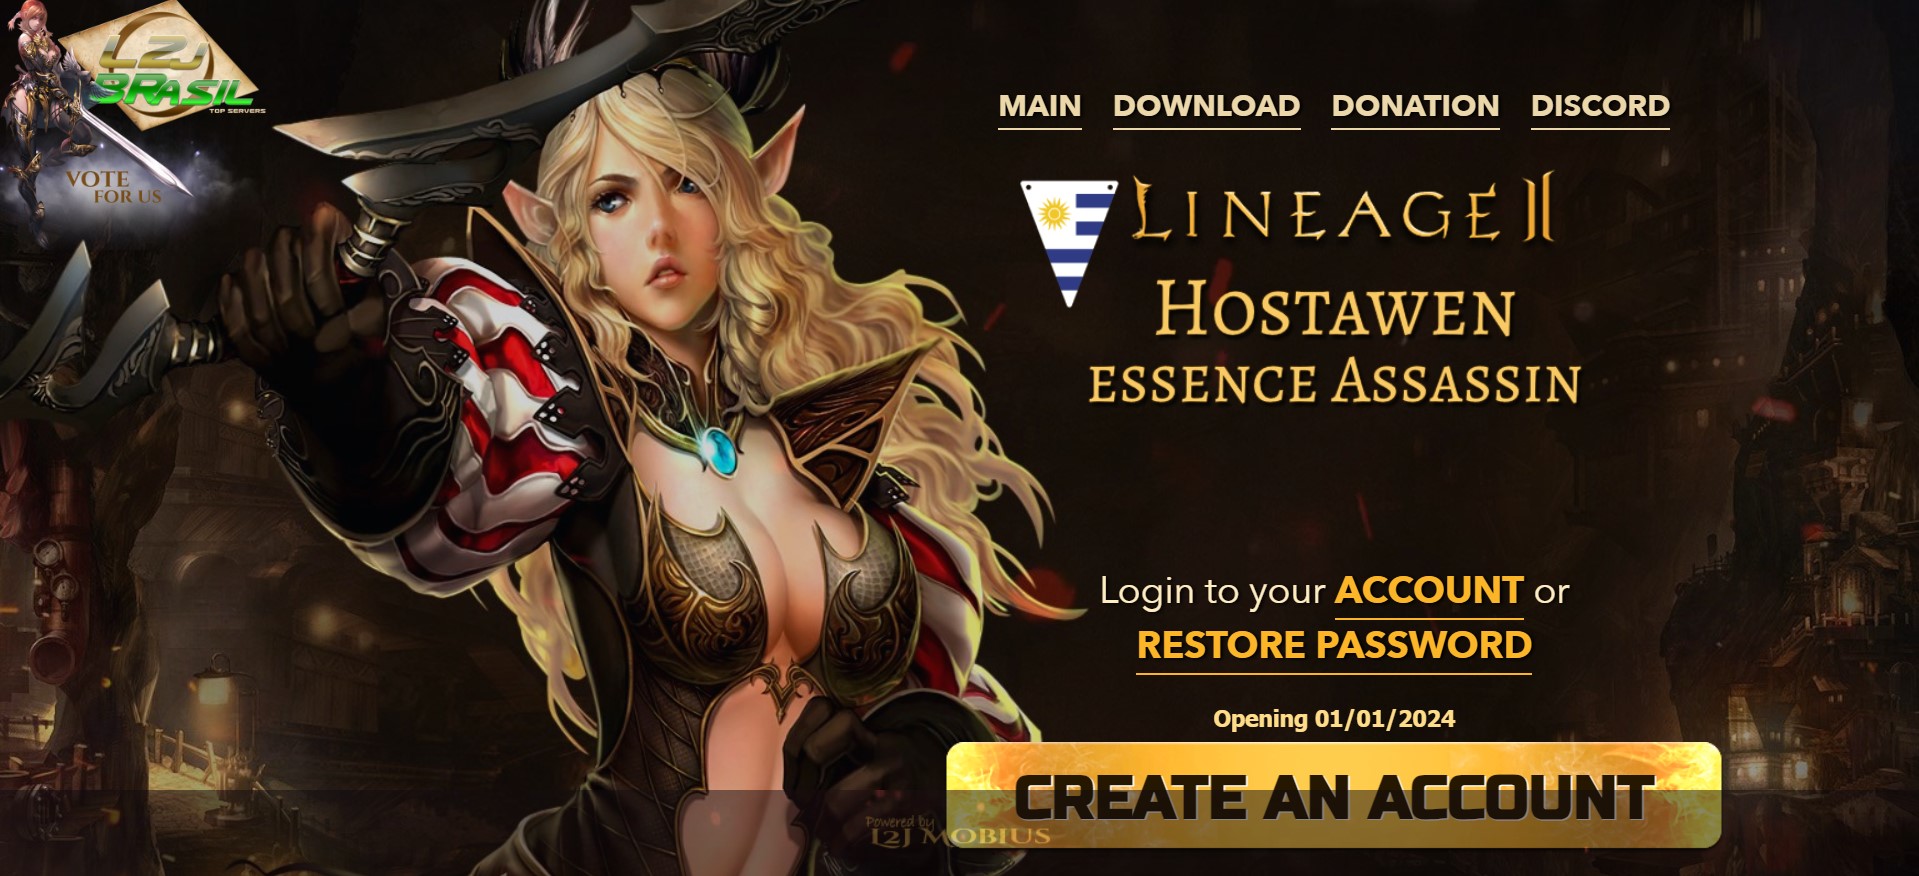 🚀 Immerse Yourself in the Essence Chronicles on L2HostAwen! x25 Rates! 🔥